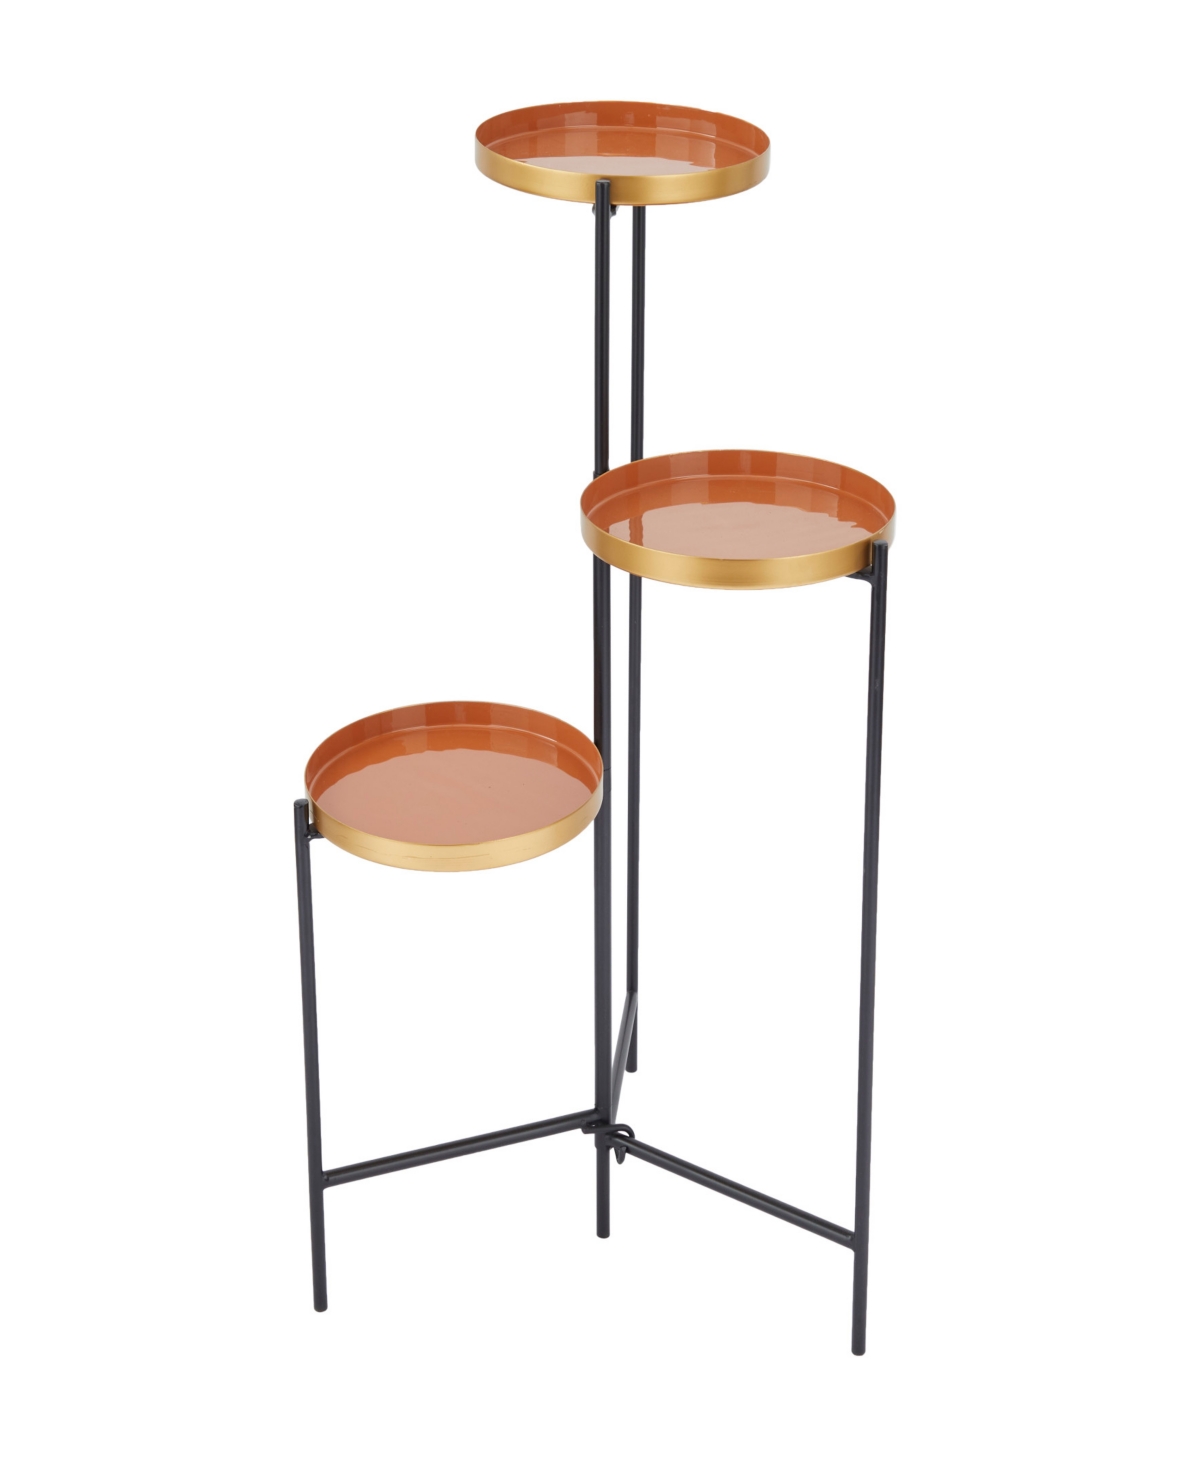 Metal Foldable 3 Tier Plant Stand with Enameled Interior, 22" x 18" x 32" - Orange